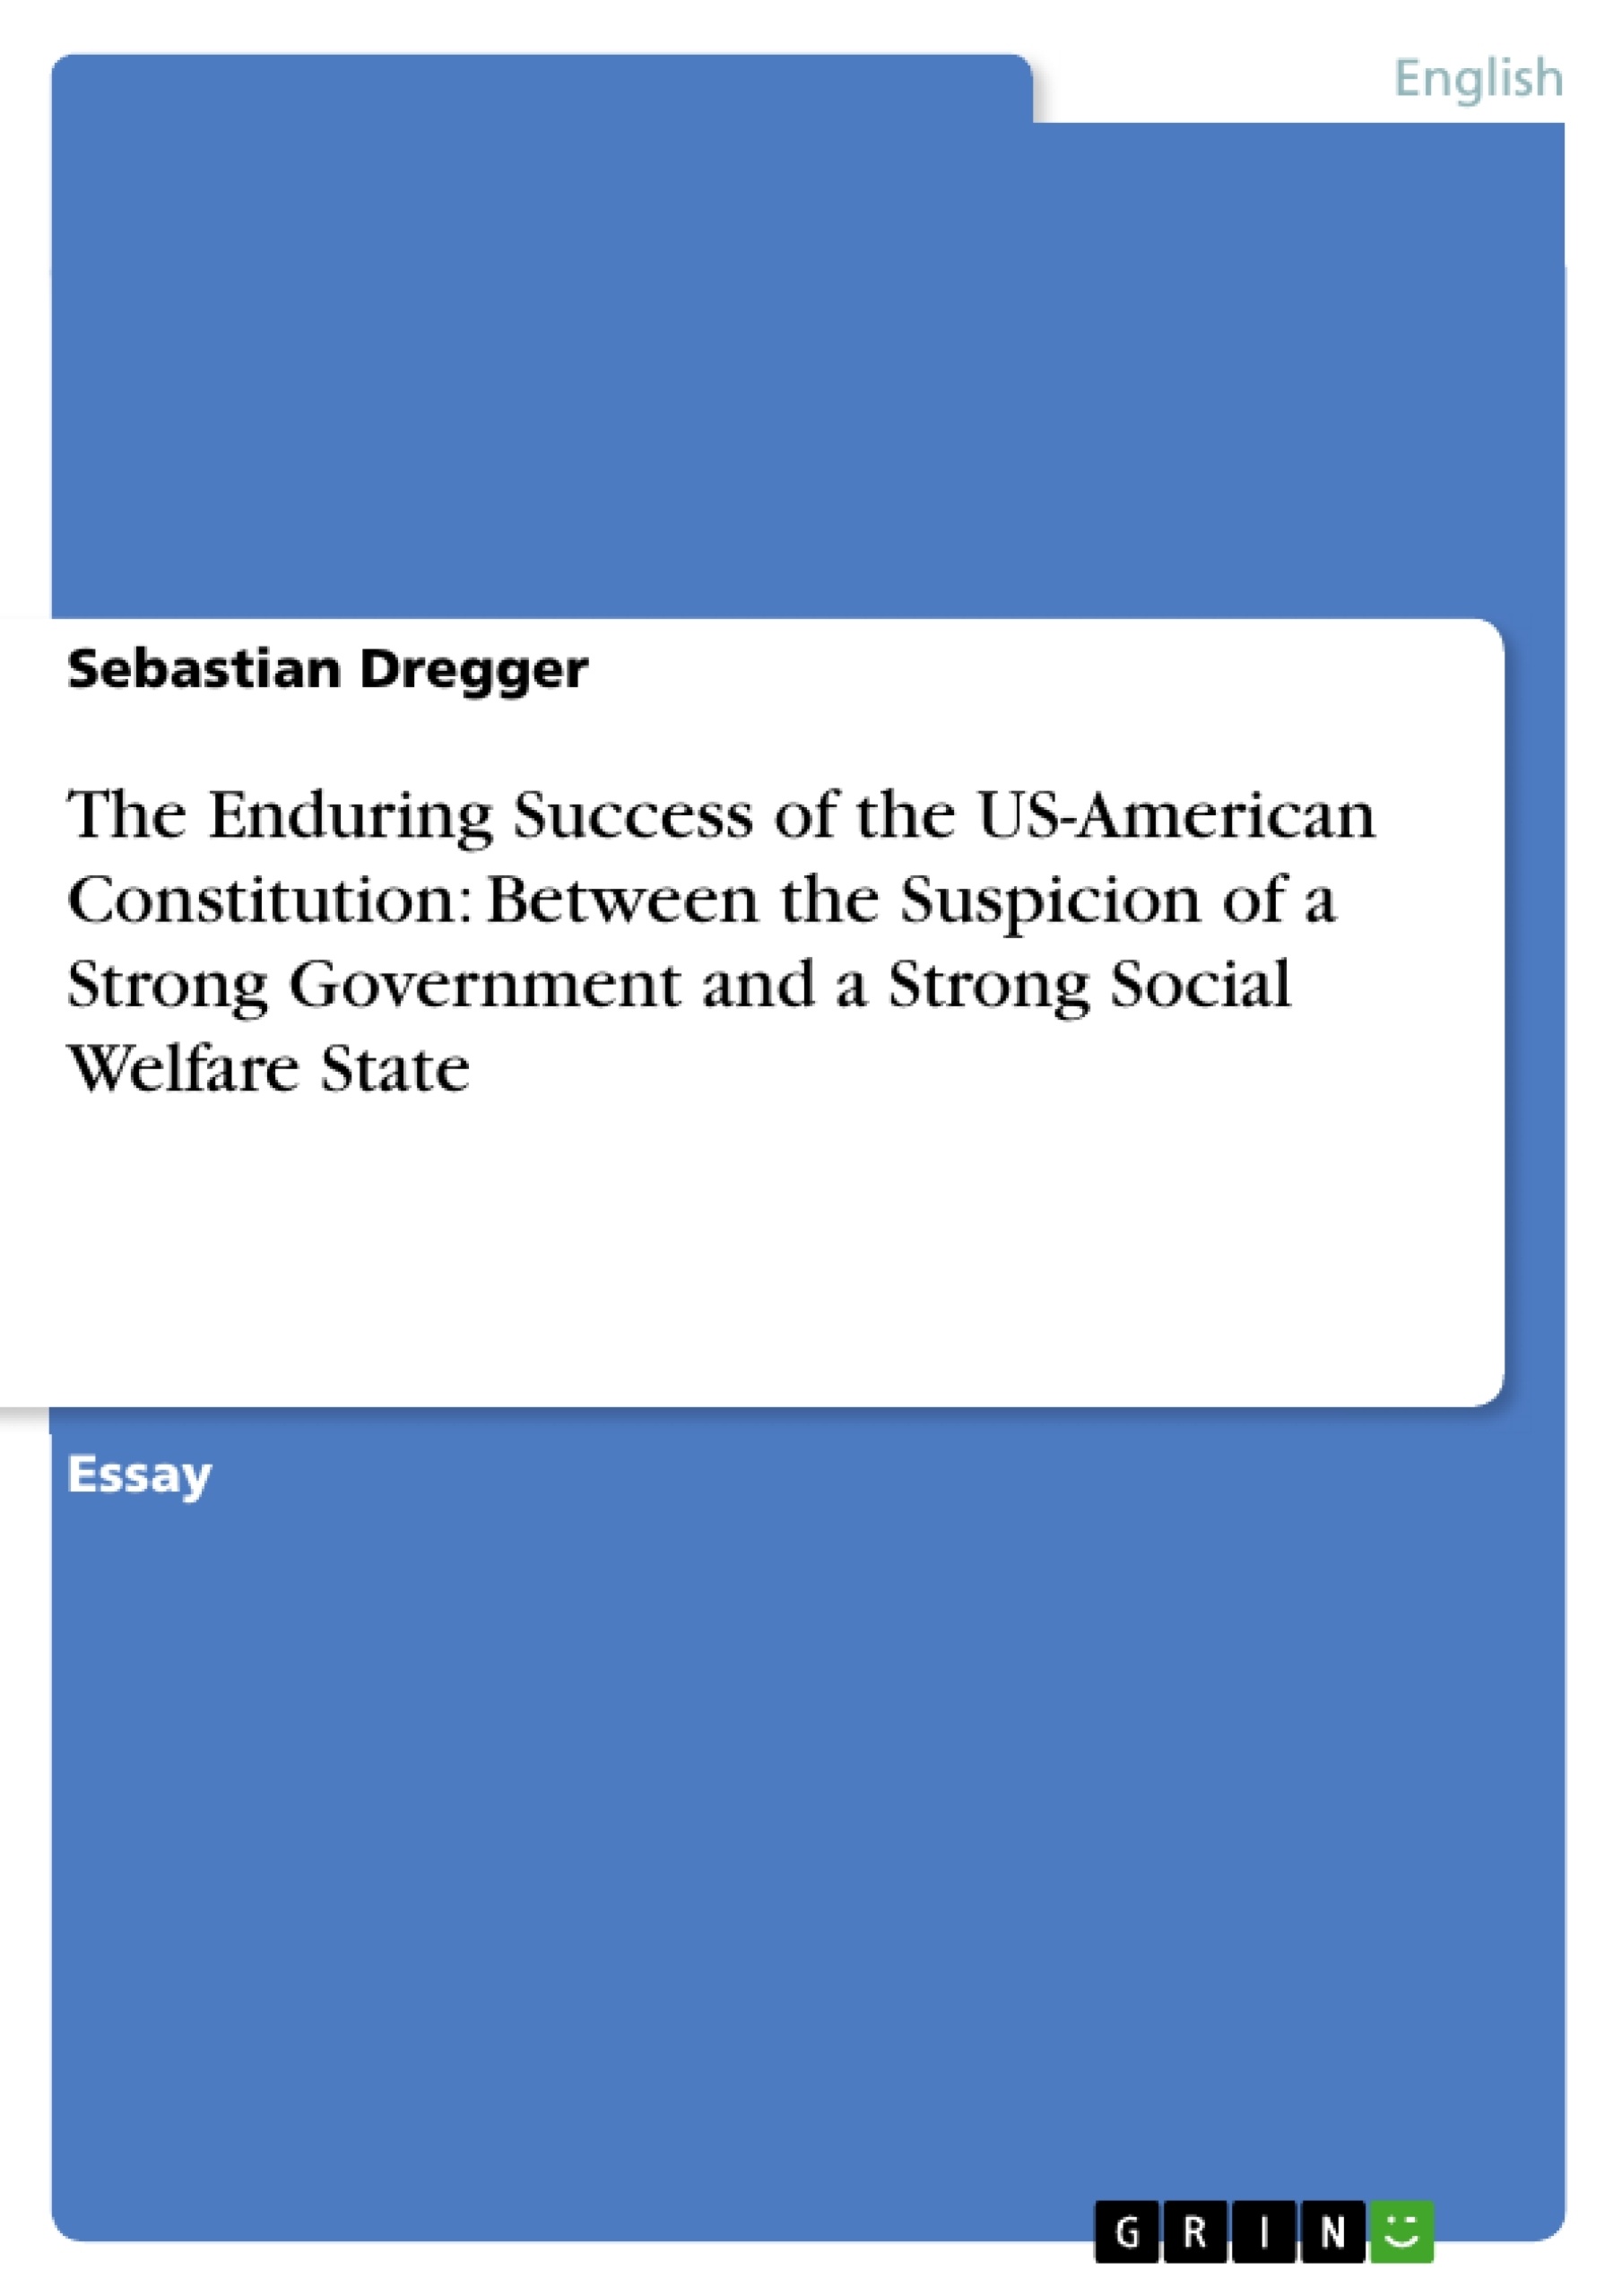 Titre: The Enduring Success of the US-American Constitution: Between the Suspicion of a Strong Government and a Strong Social Welfare State